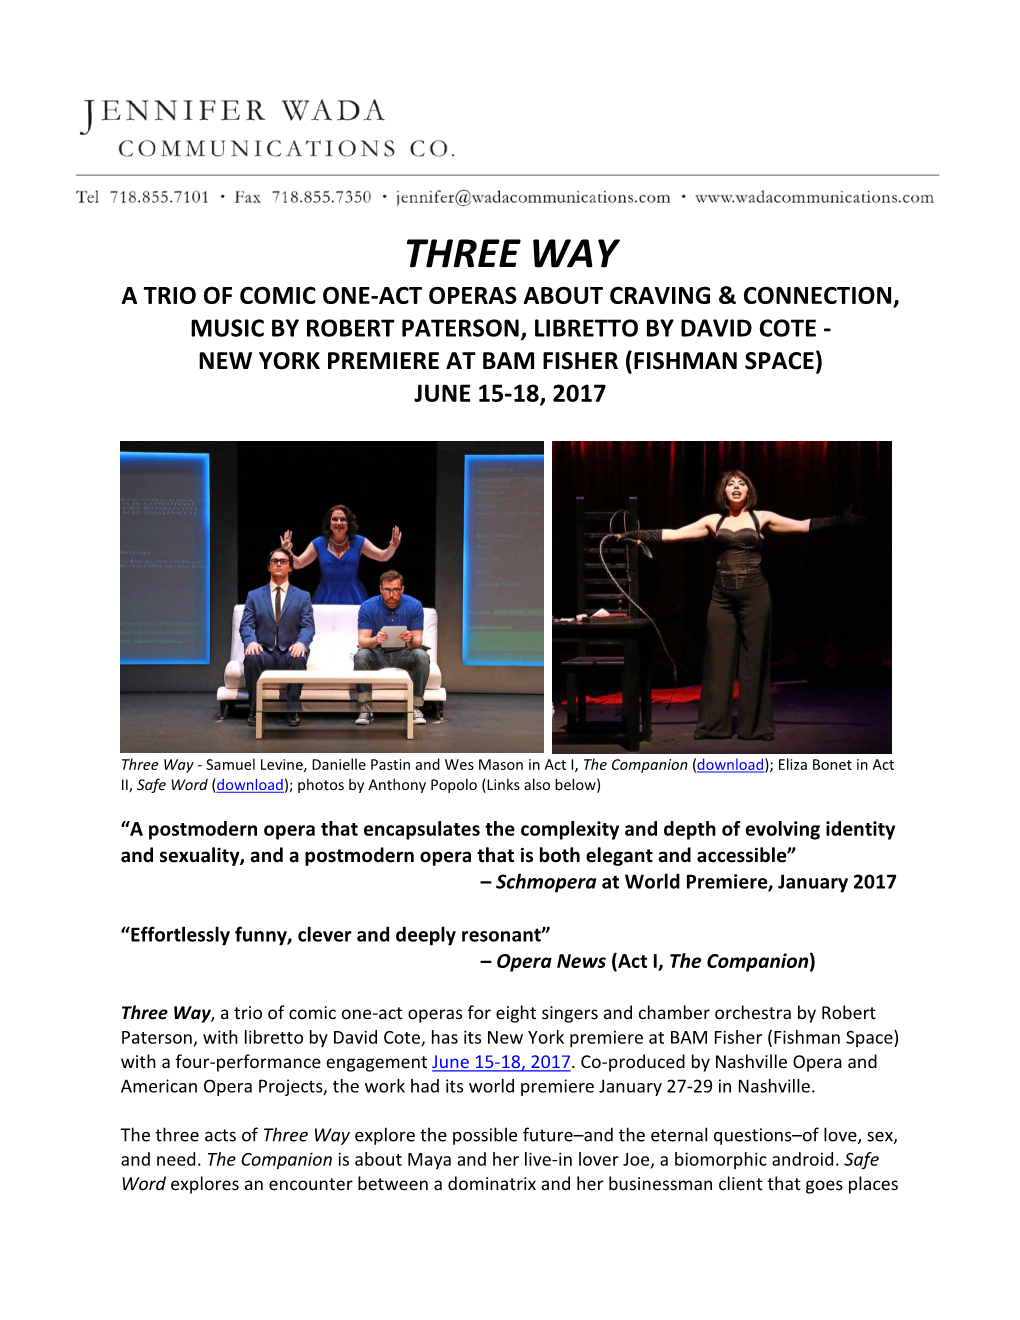 Three Way a Trio of Comic One-Act Operas About Craving & Connection